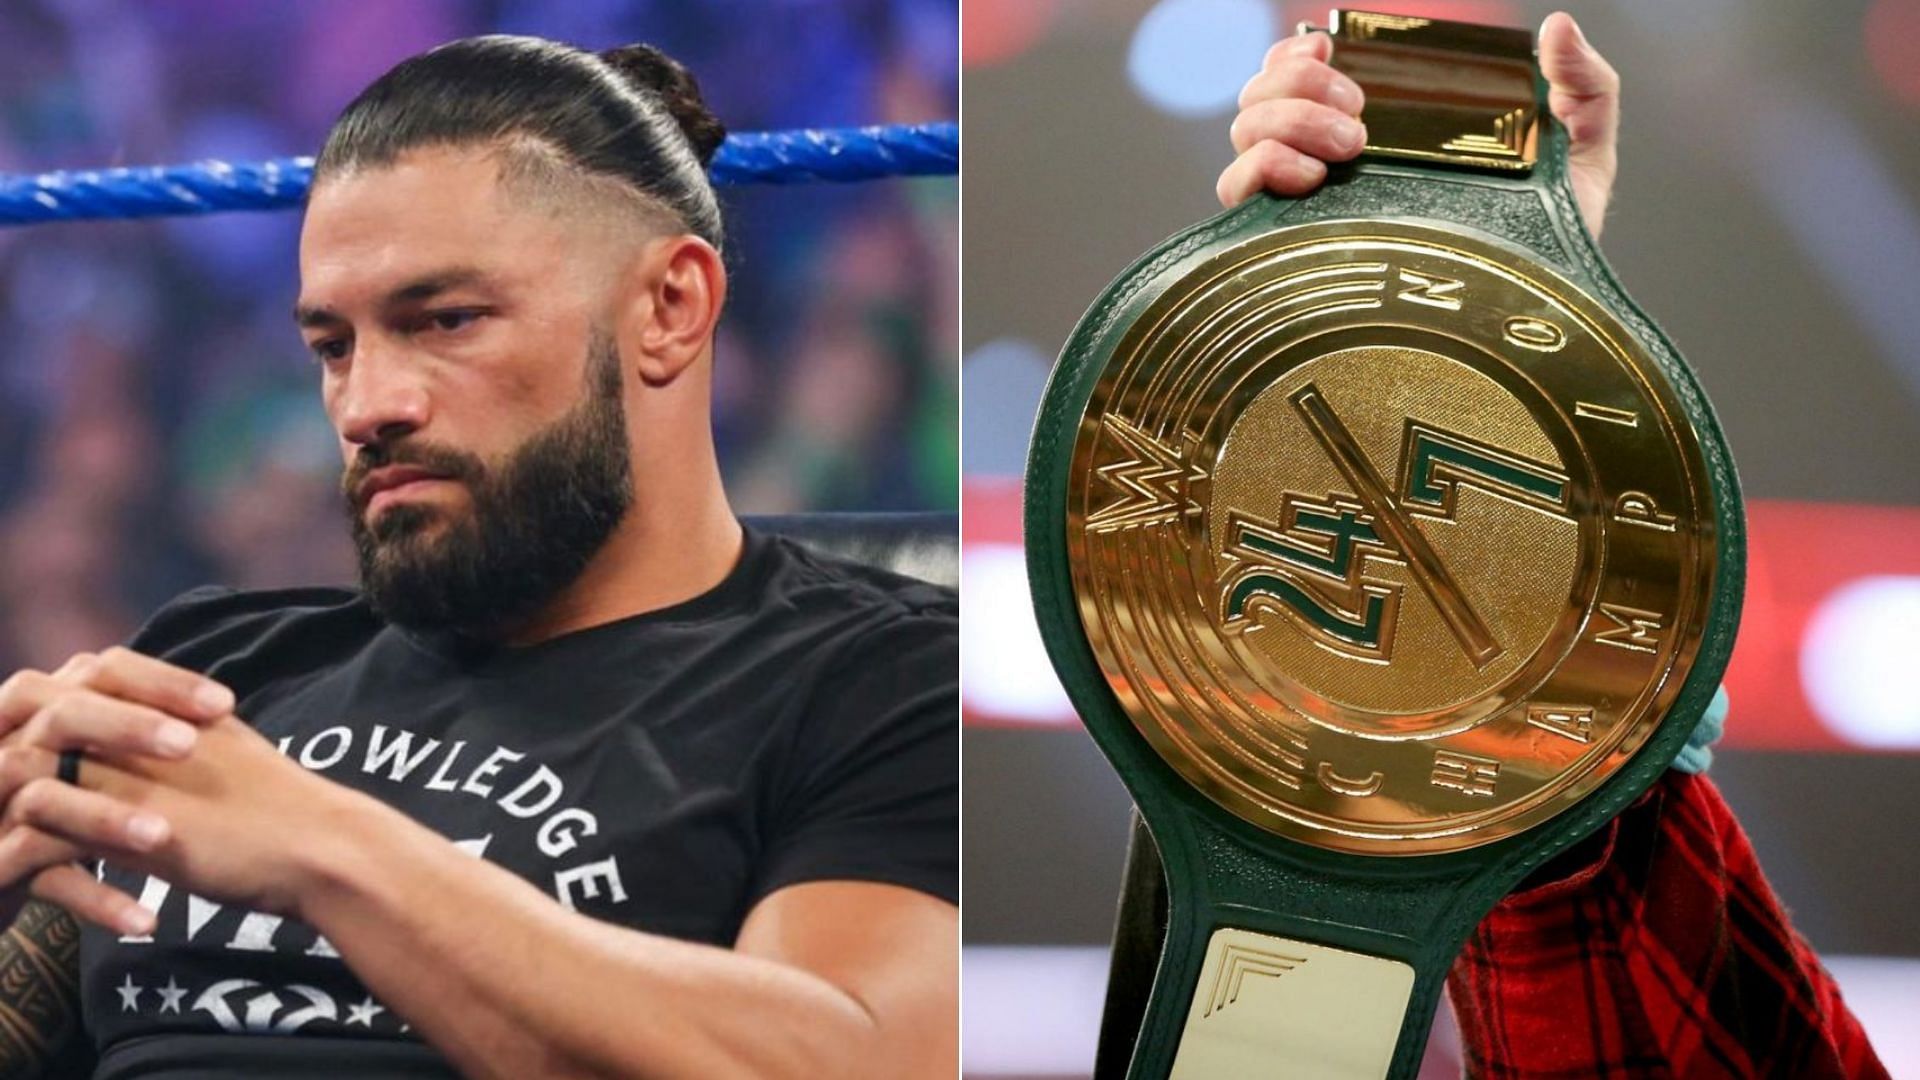 Does Roman Reigns has a new challenger?